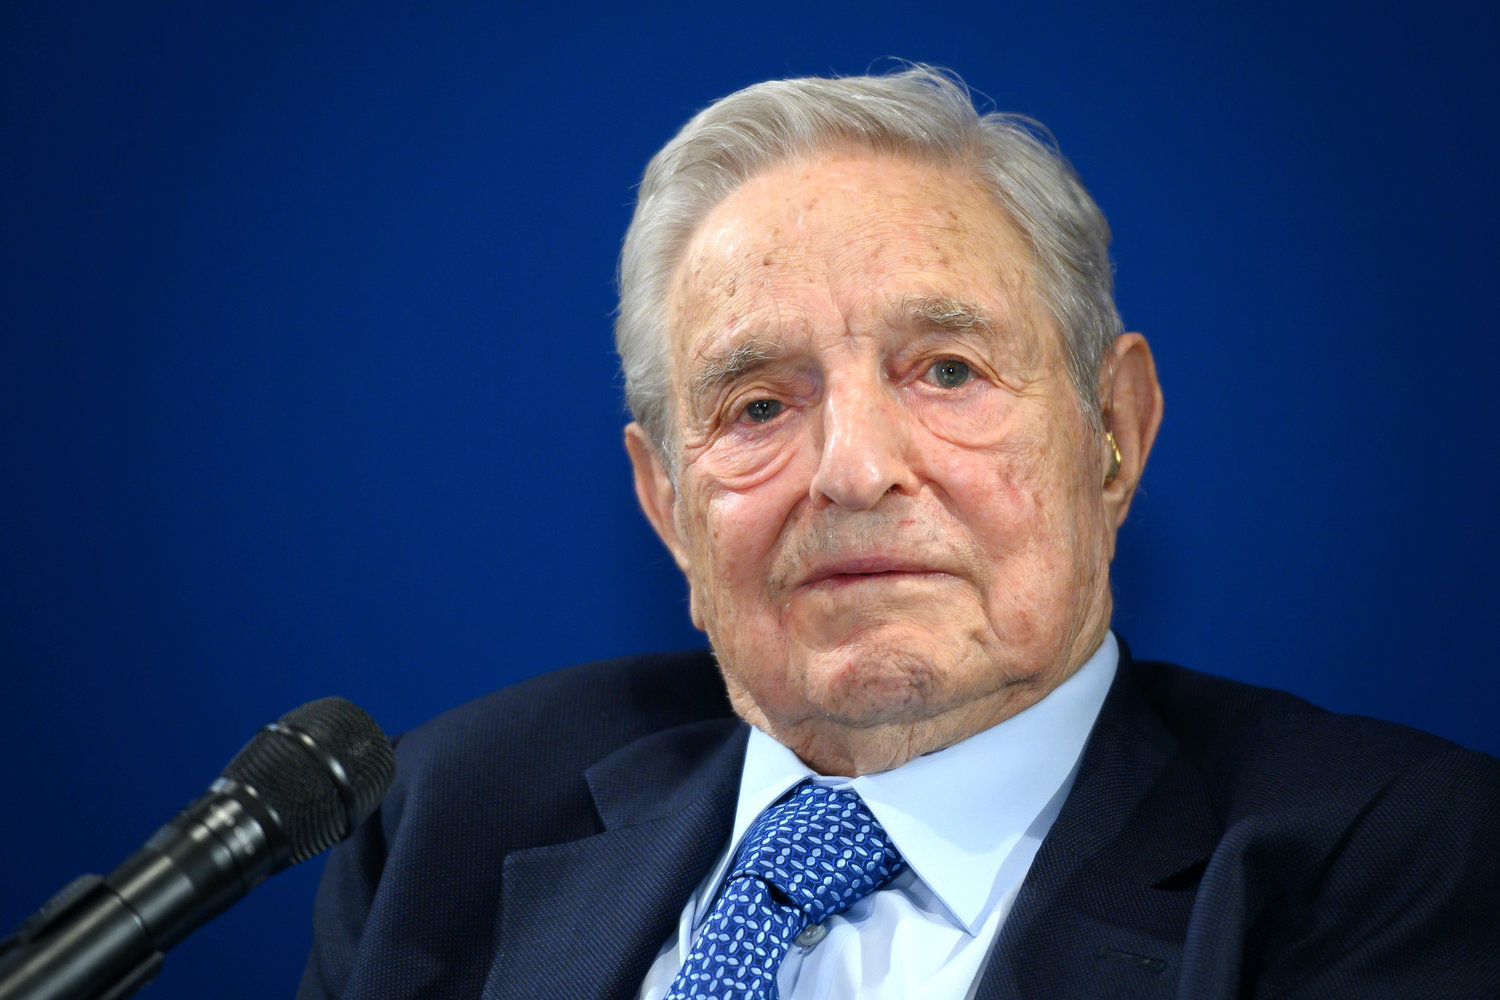 George Soros, in January 2020, has been the target of 500,000 negative tweets in one day.